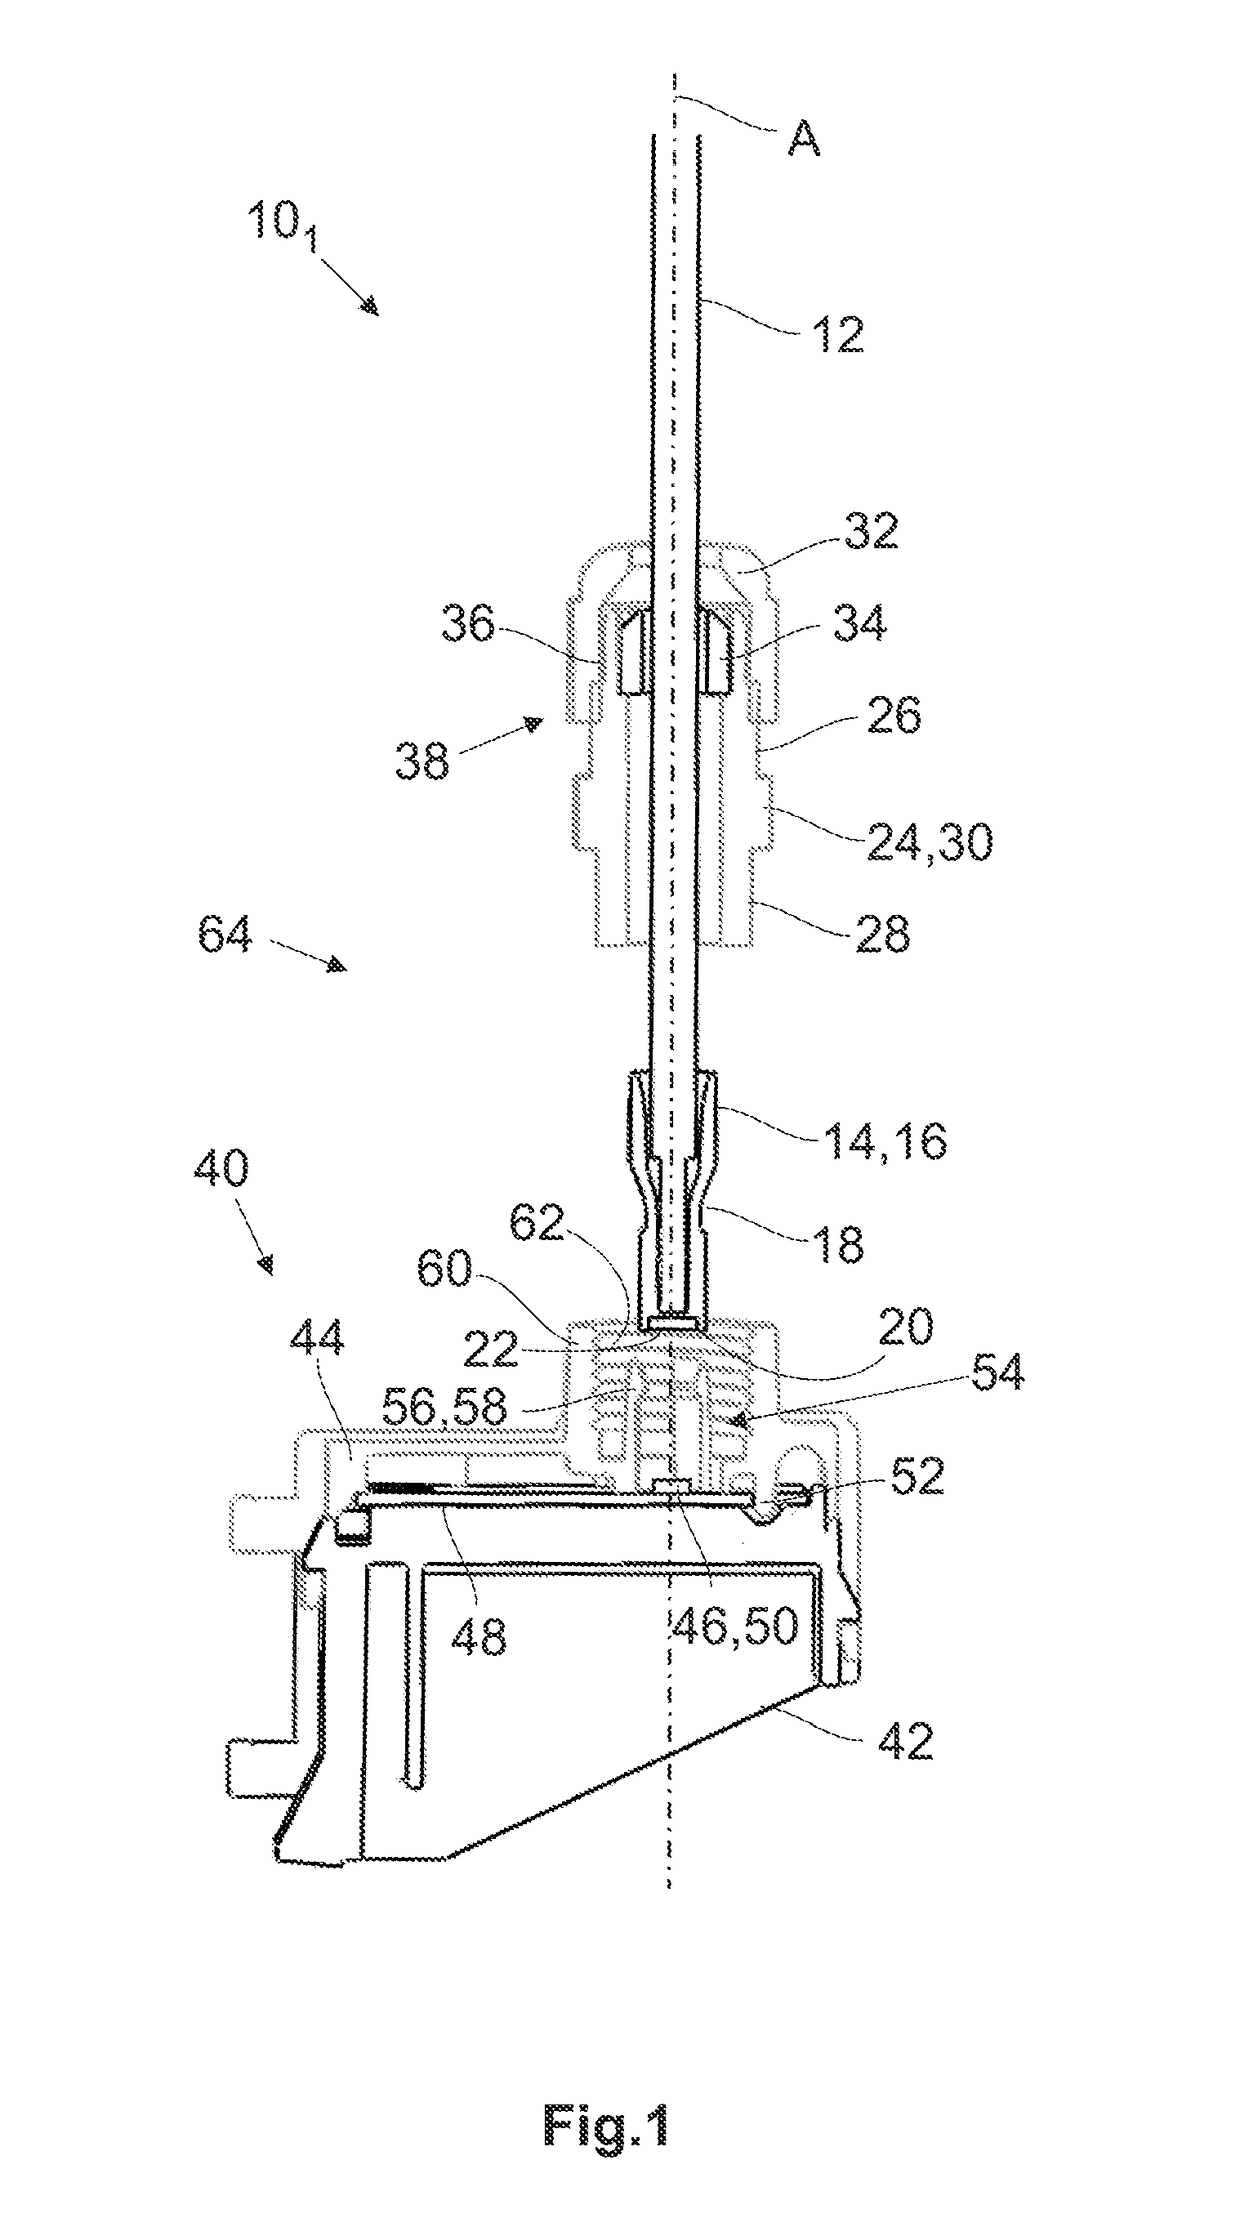 Apparatus for connecting a fiber optic or rigid light guide to a light source